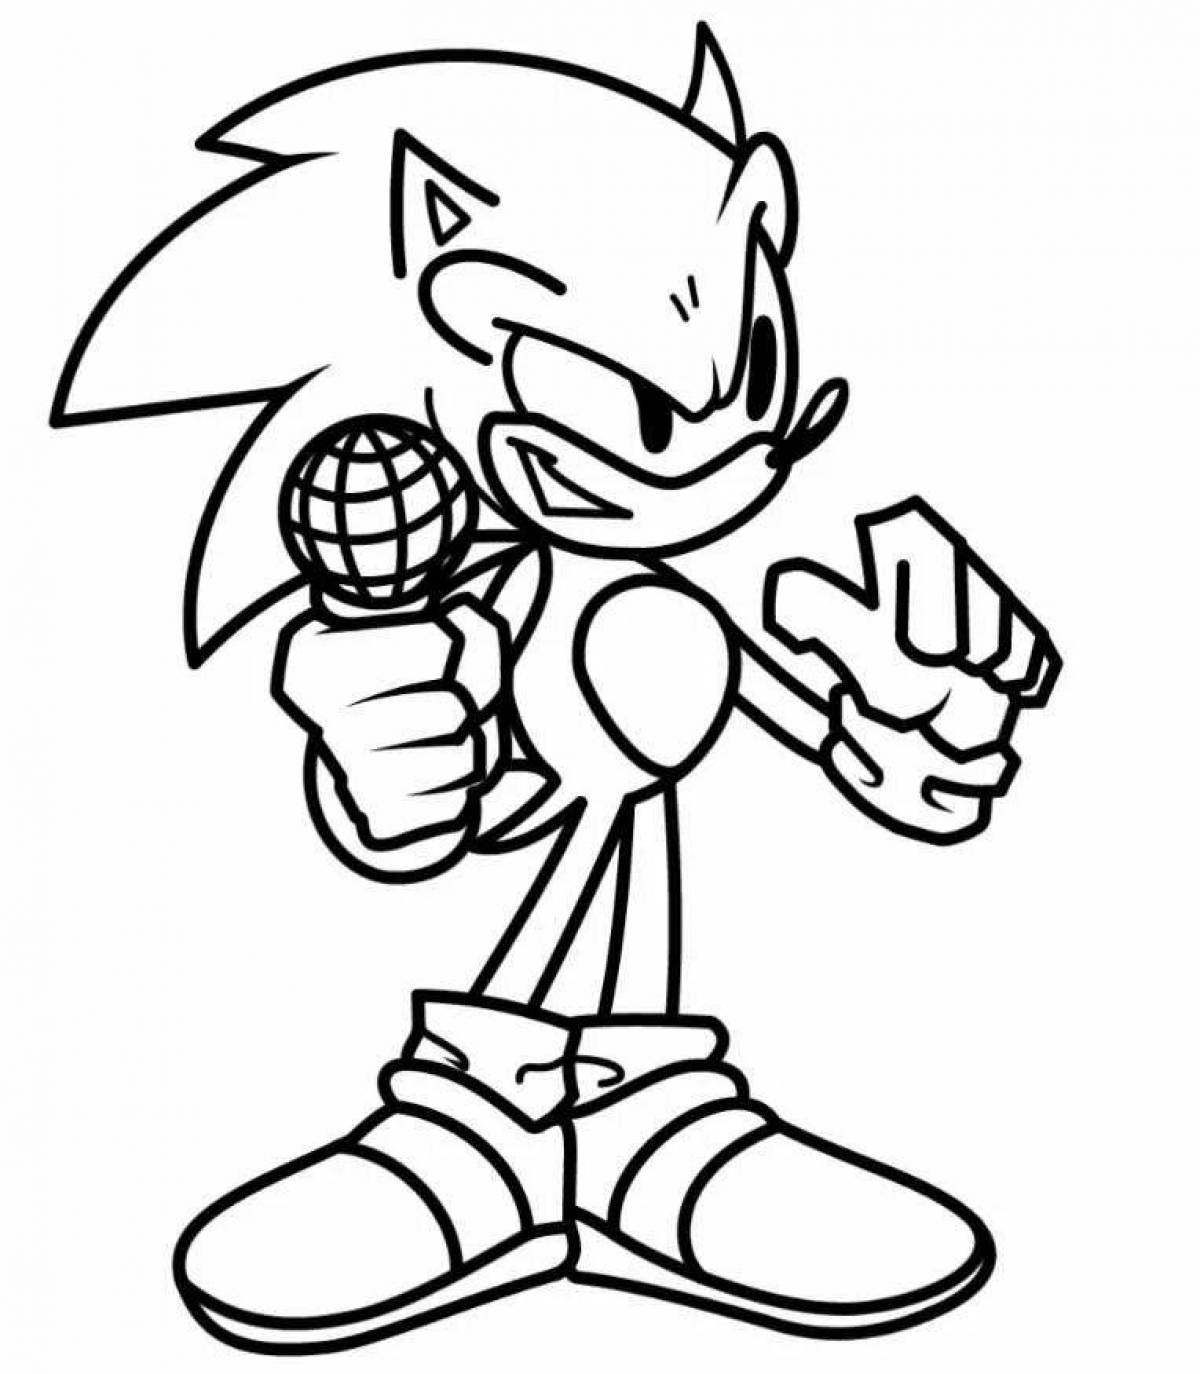 Sonicexe fnf live coloring